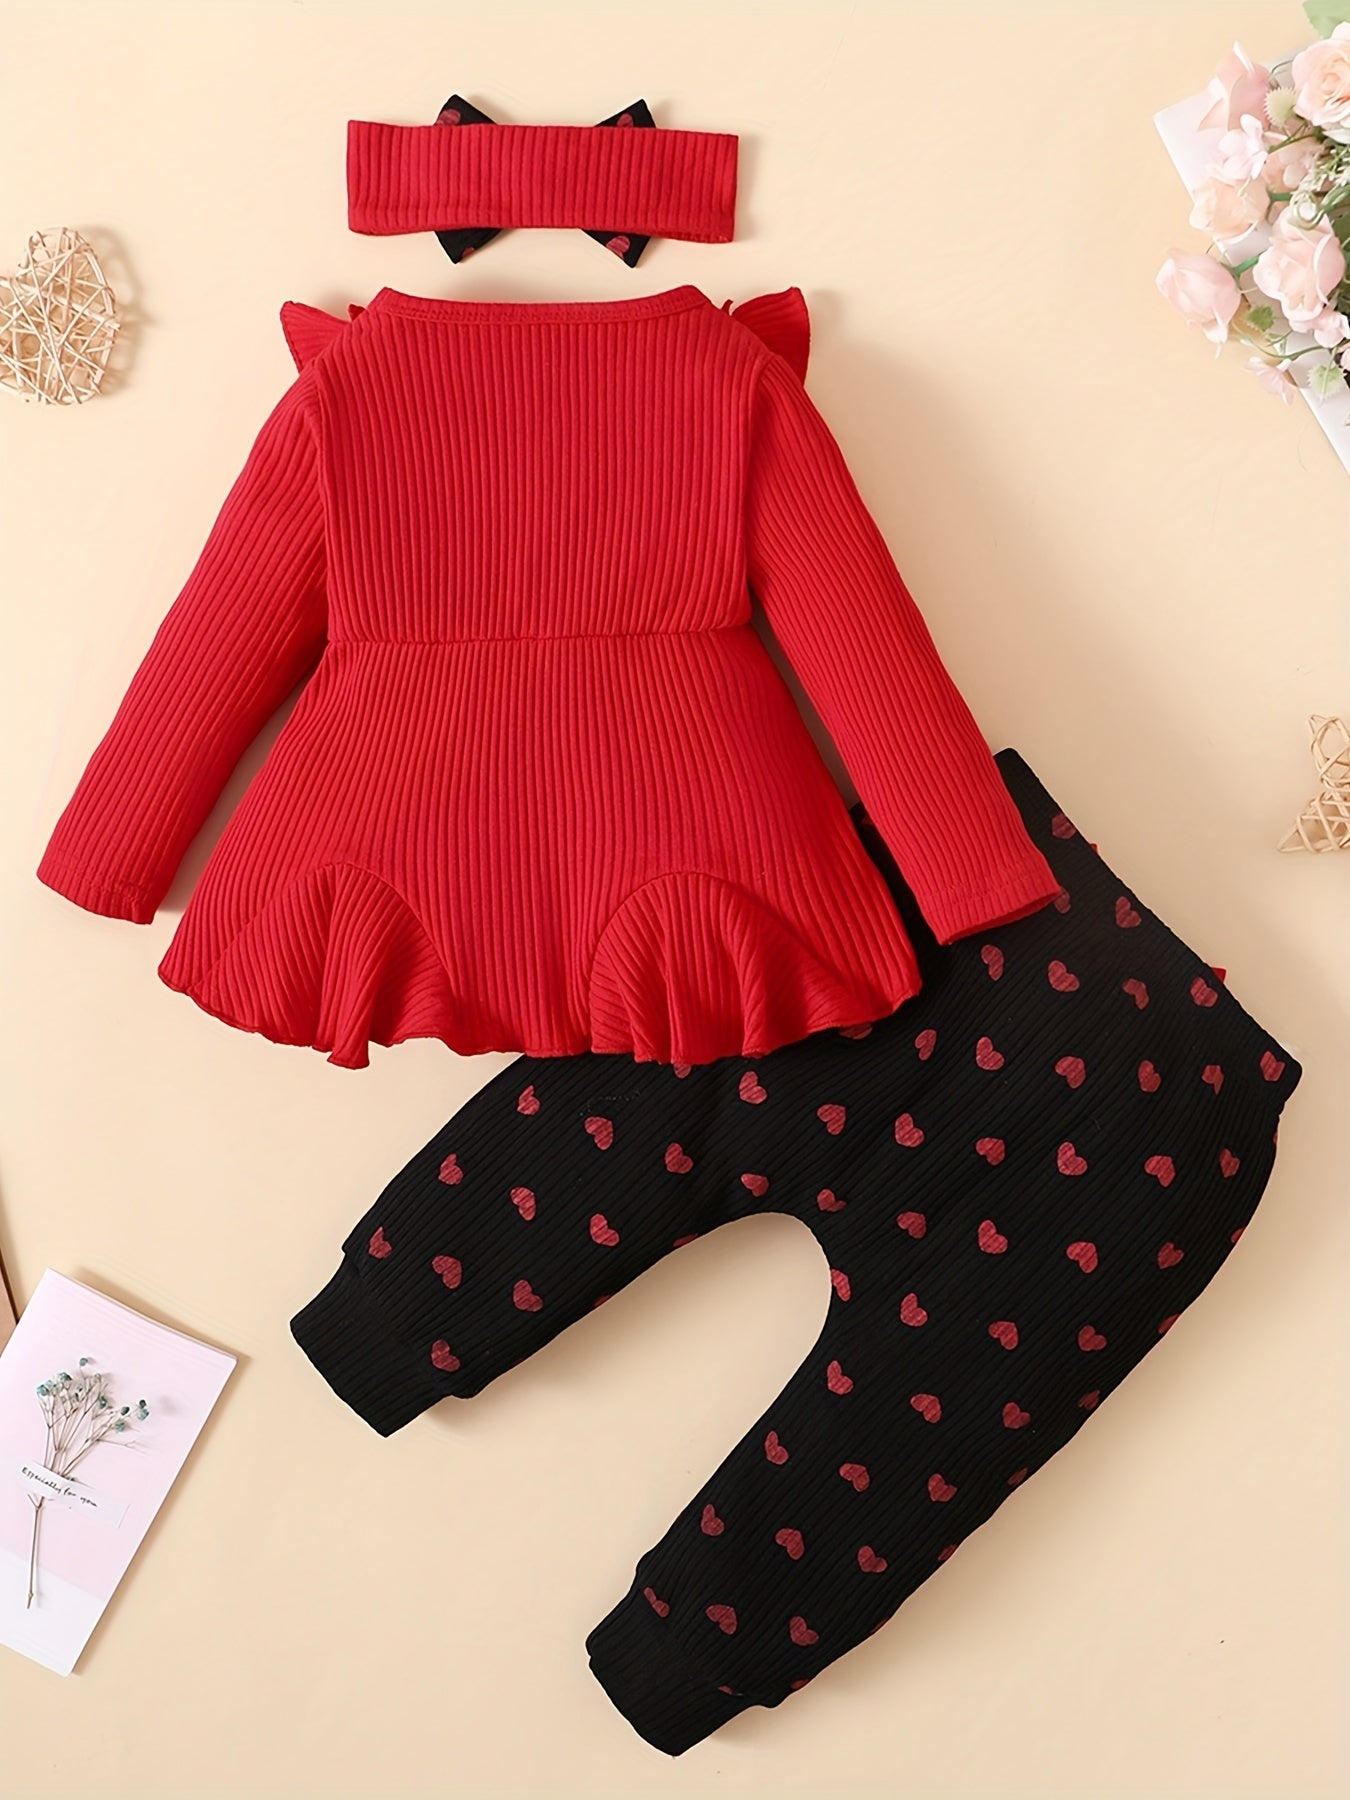 Adorable 3-Piece Outfit for Baby Girls: Ruffle Top, Leggings & Bow Headband!